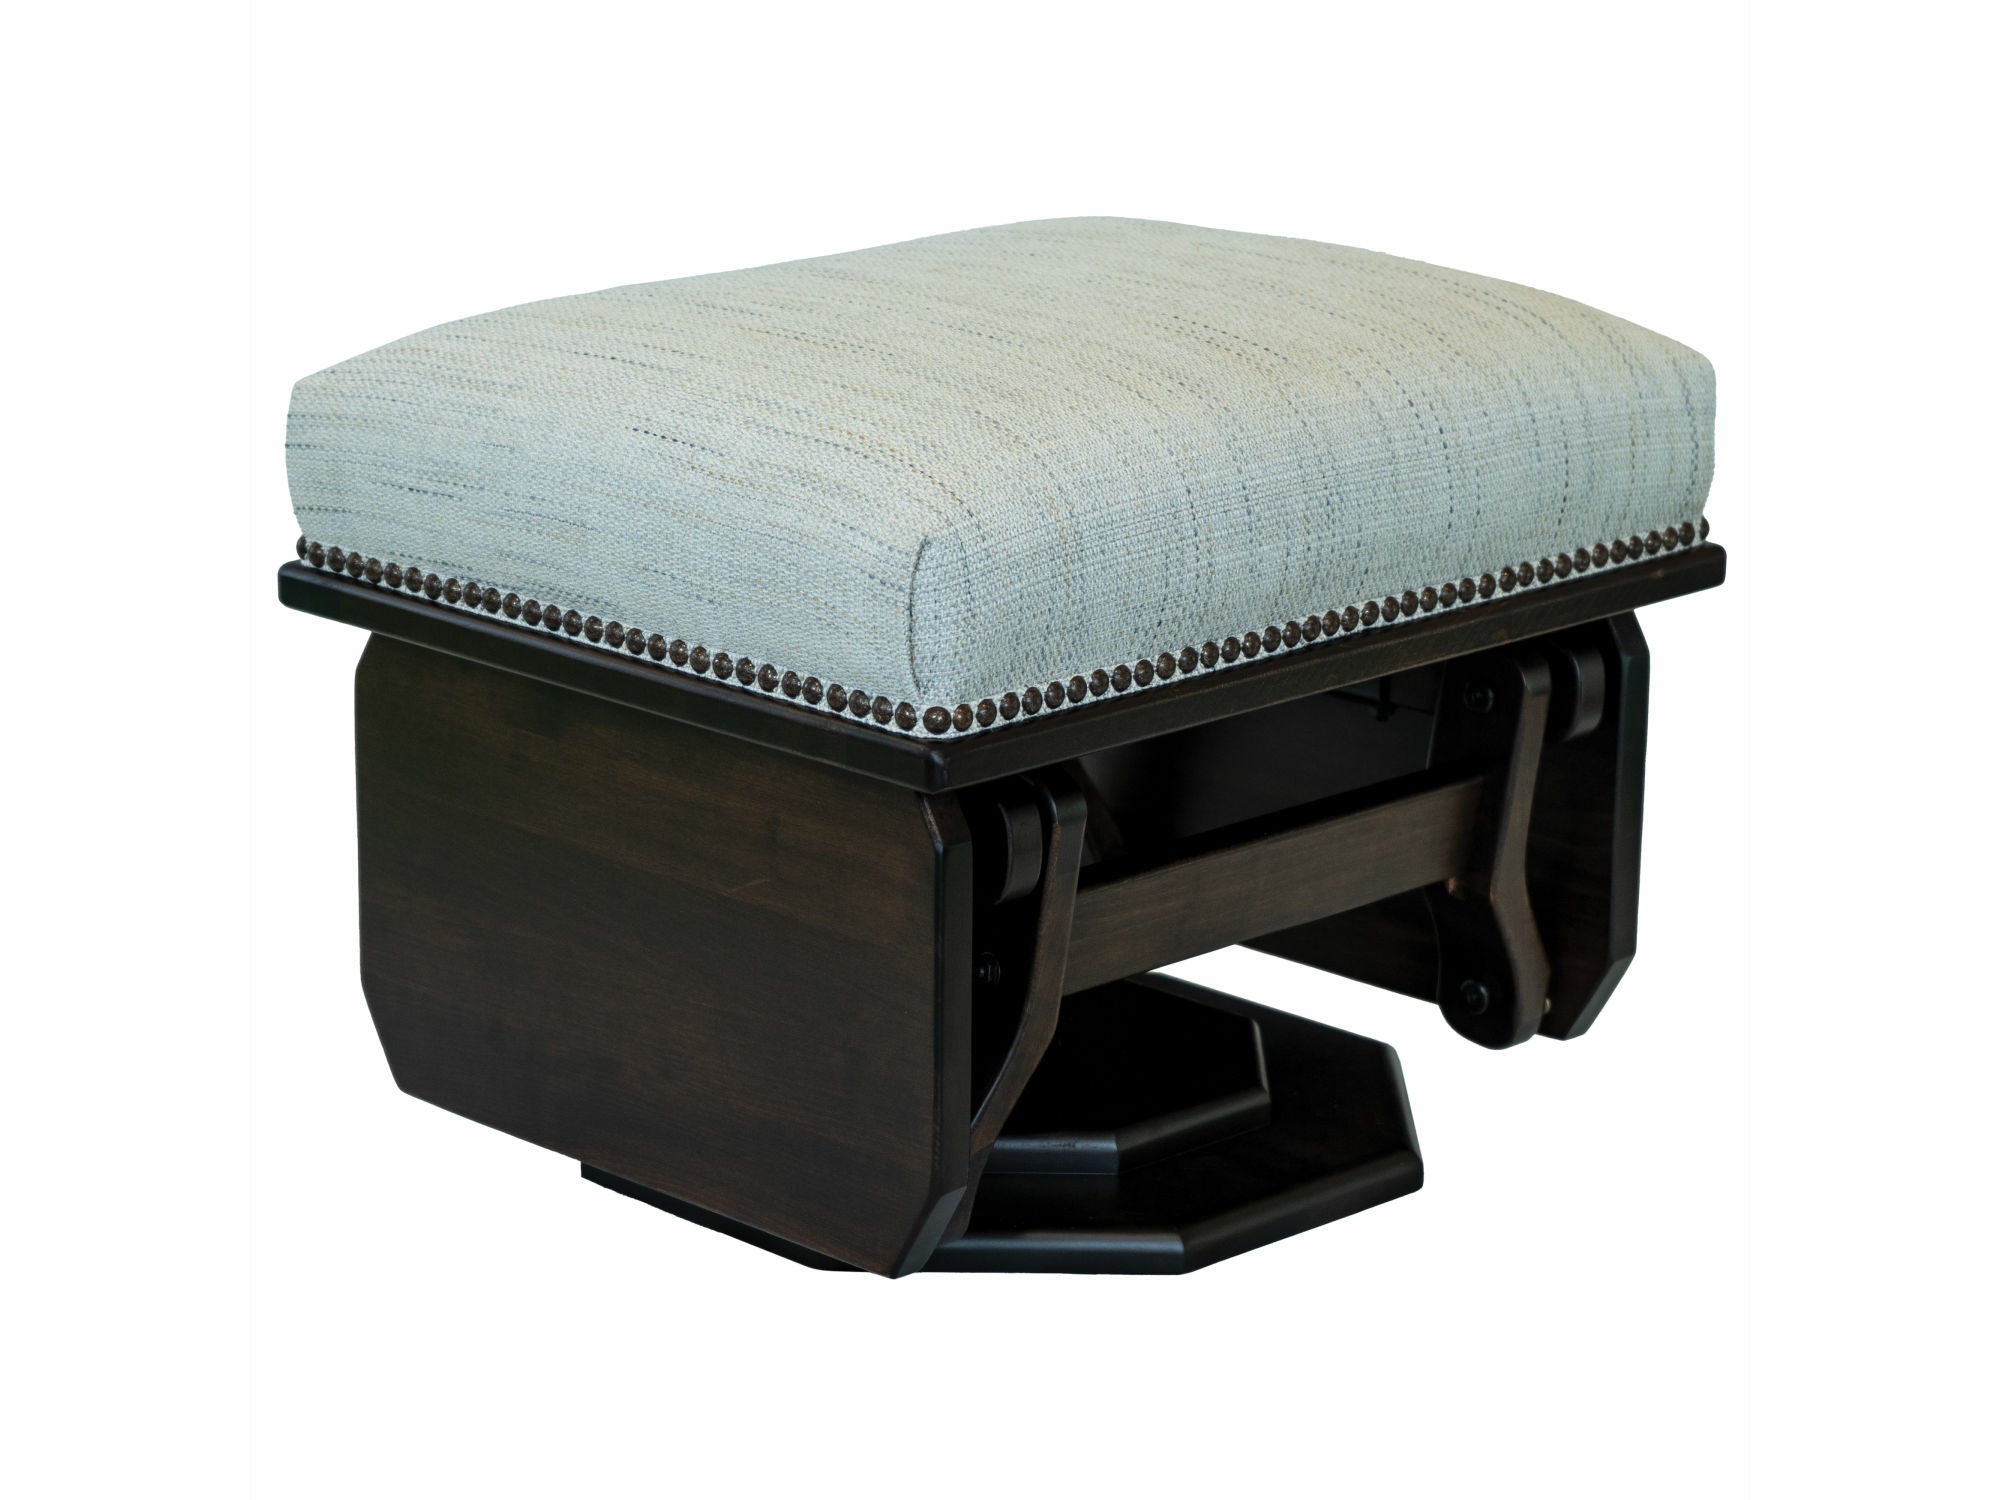 Amish Mission 20.5" Ottoman with Plat Form Base & Solid Sides